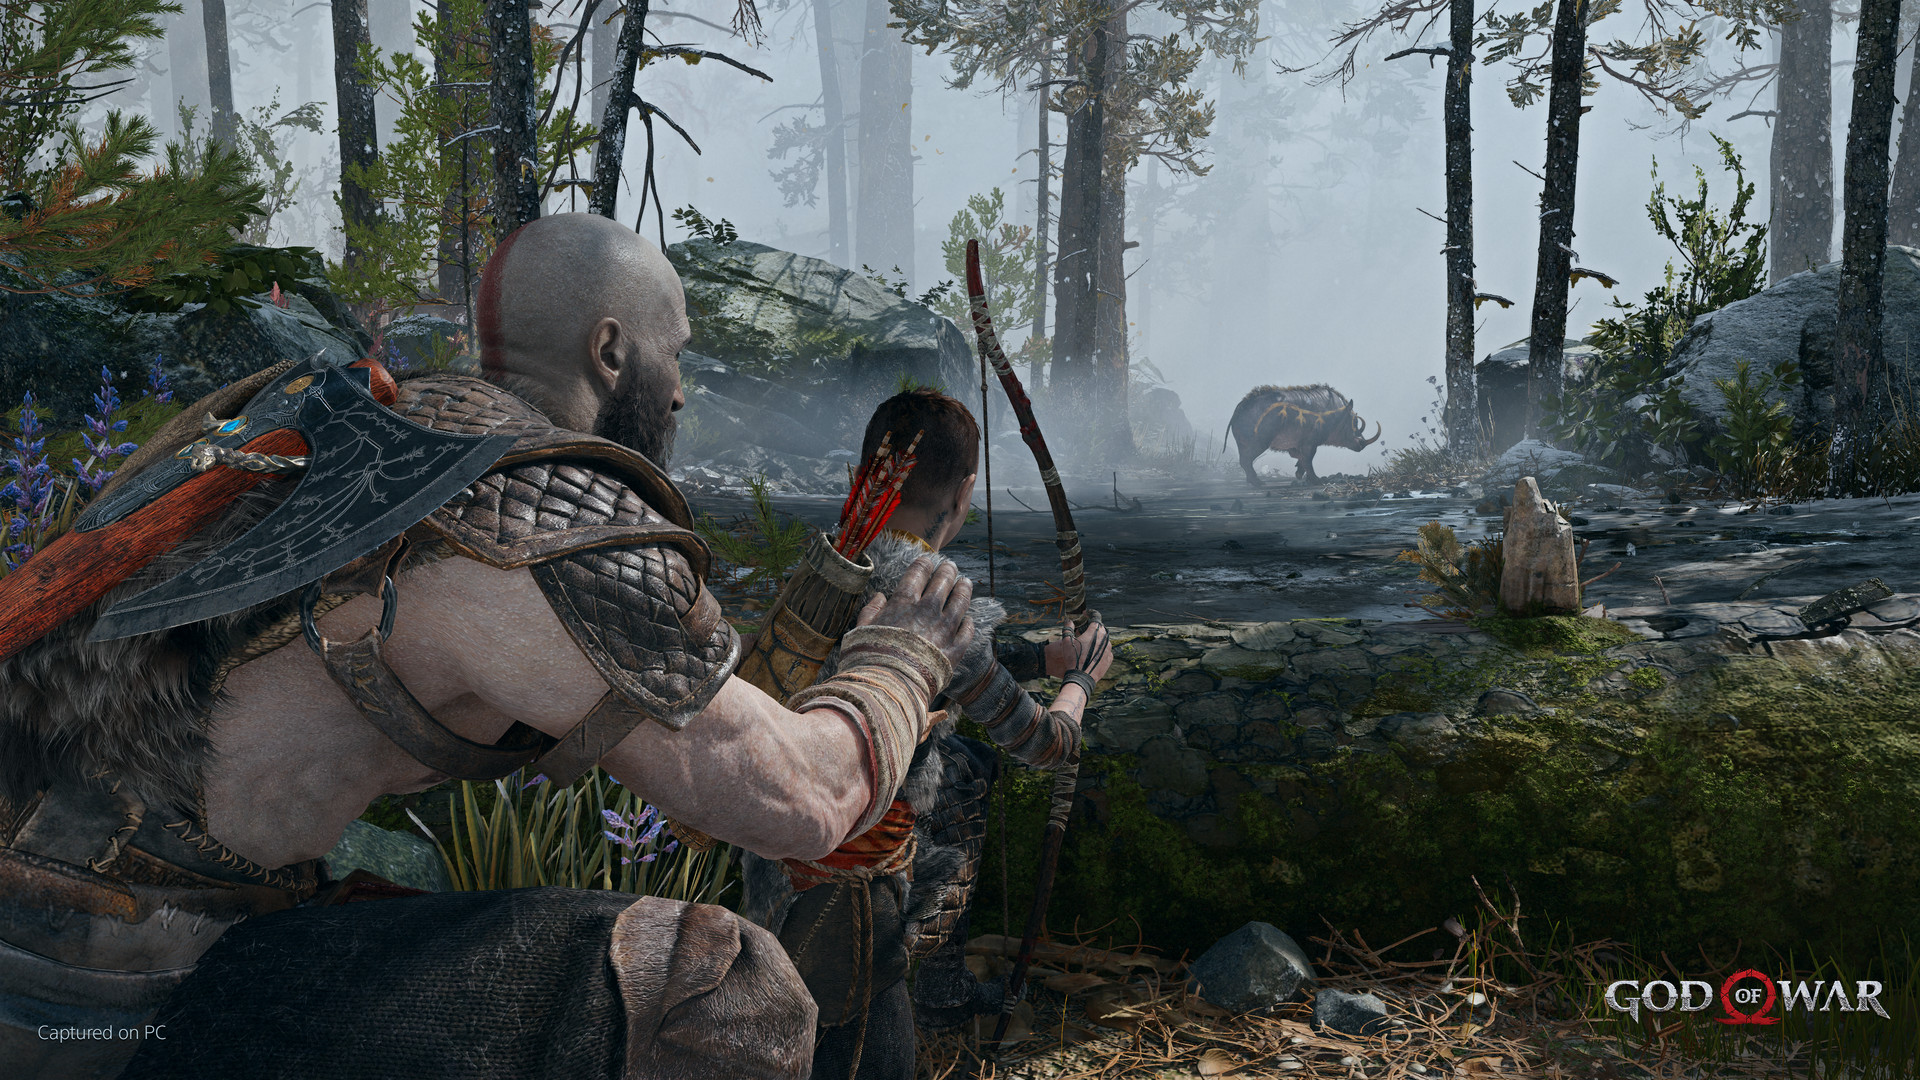 Want a God of War PC game? Here are five alternatives to try